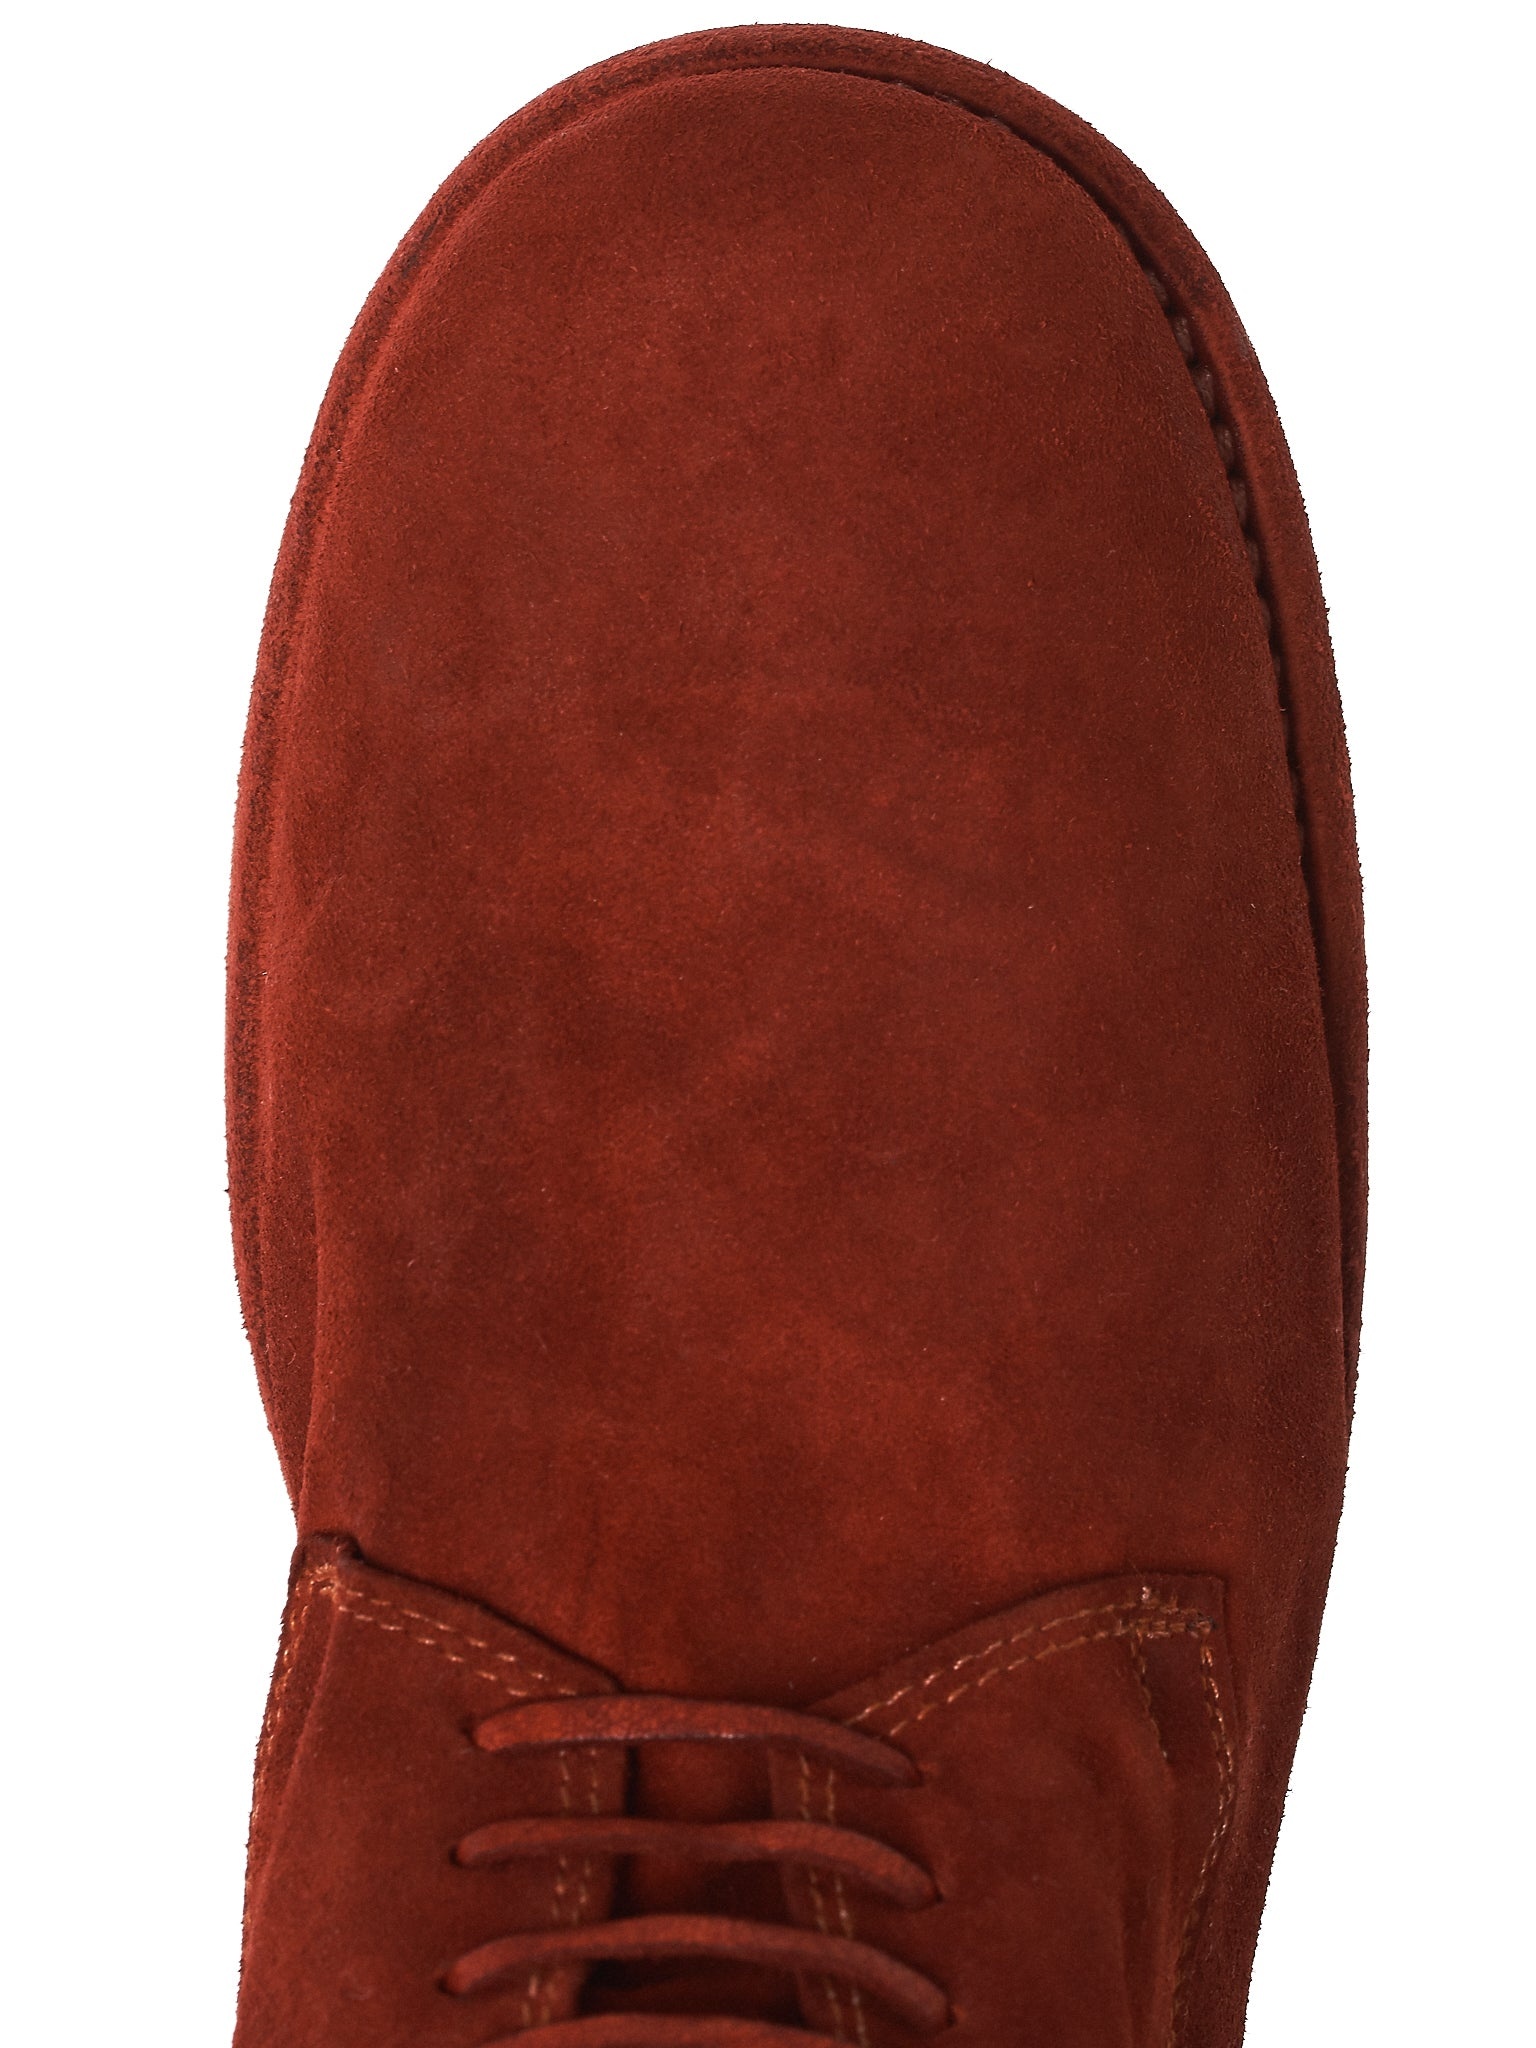 Suede Dyed Leather Boots - 5